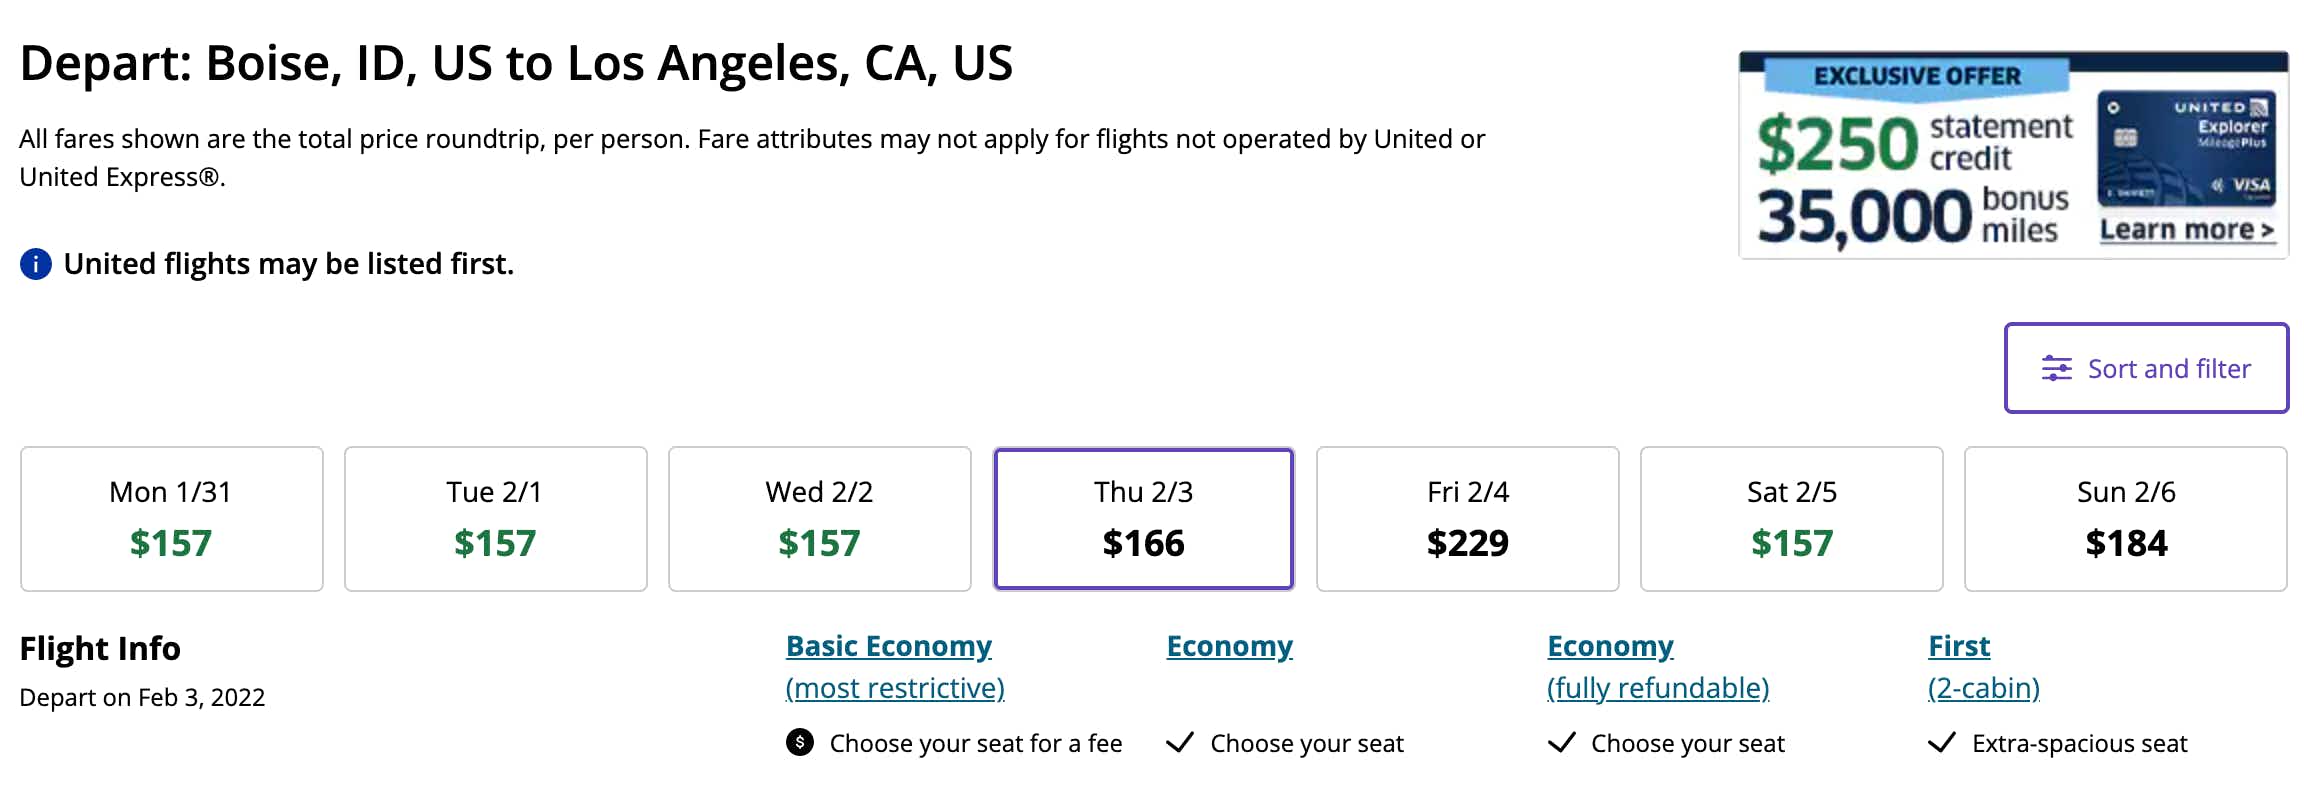 United Airlines booking page with calendar of prices